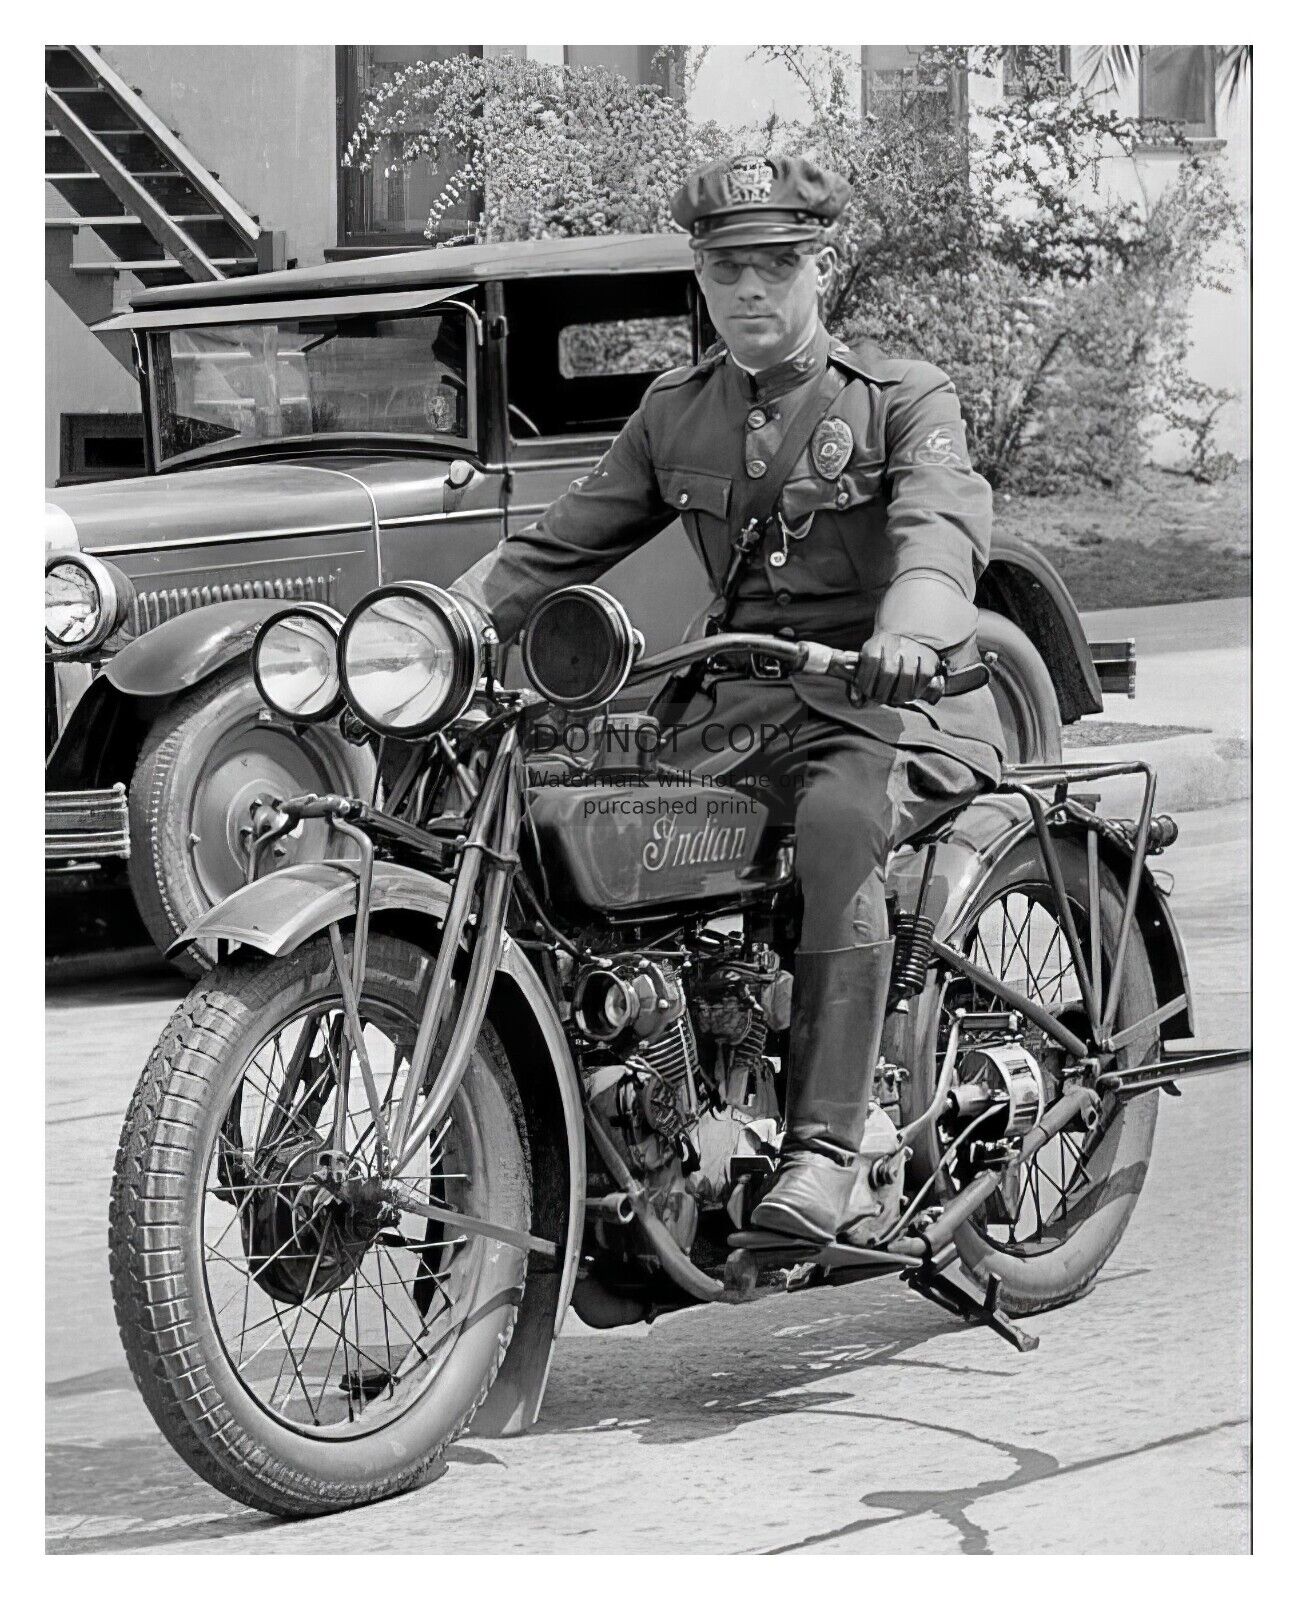 OLDTIME COP RIDING ON INDIAN MOTORCYCLE LOS ANGELES POLICE OFFICER 8X10 PHOTO